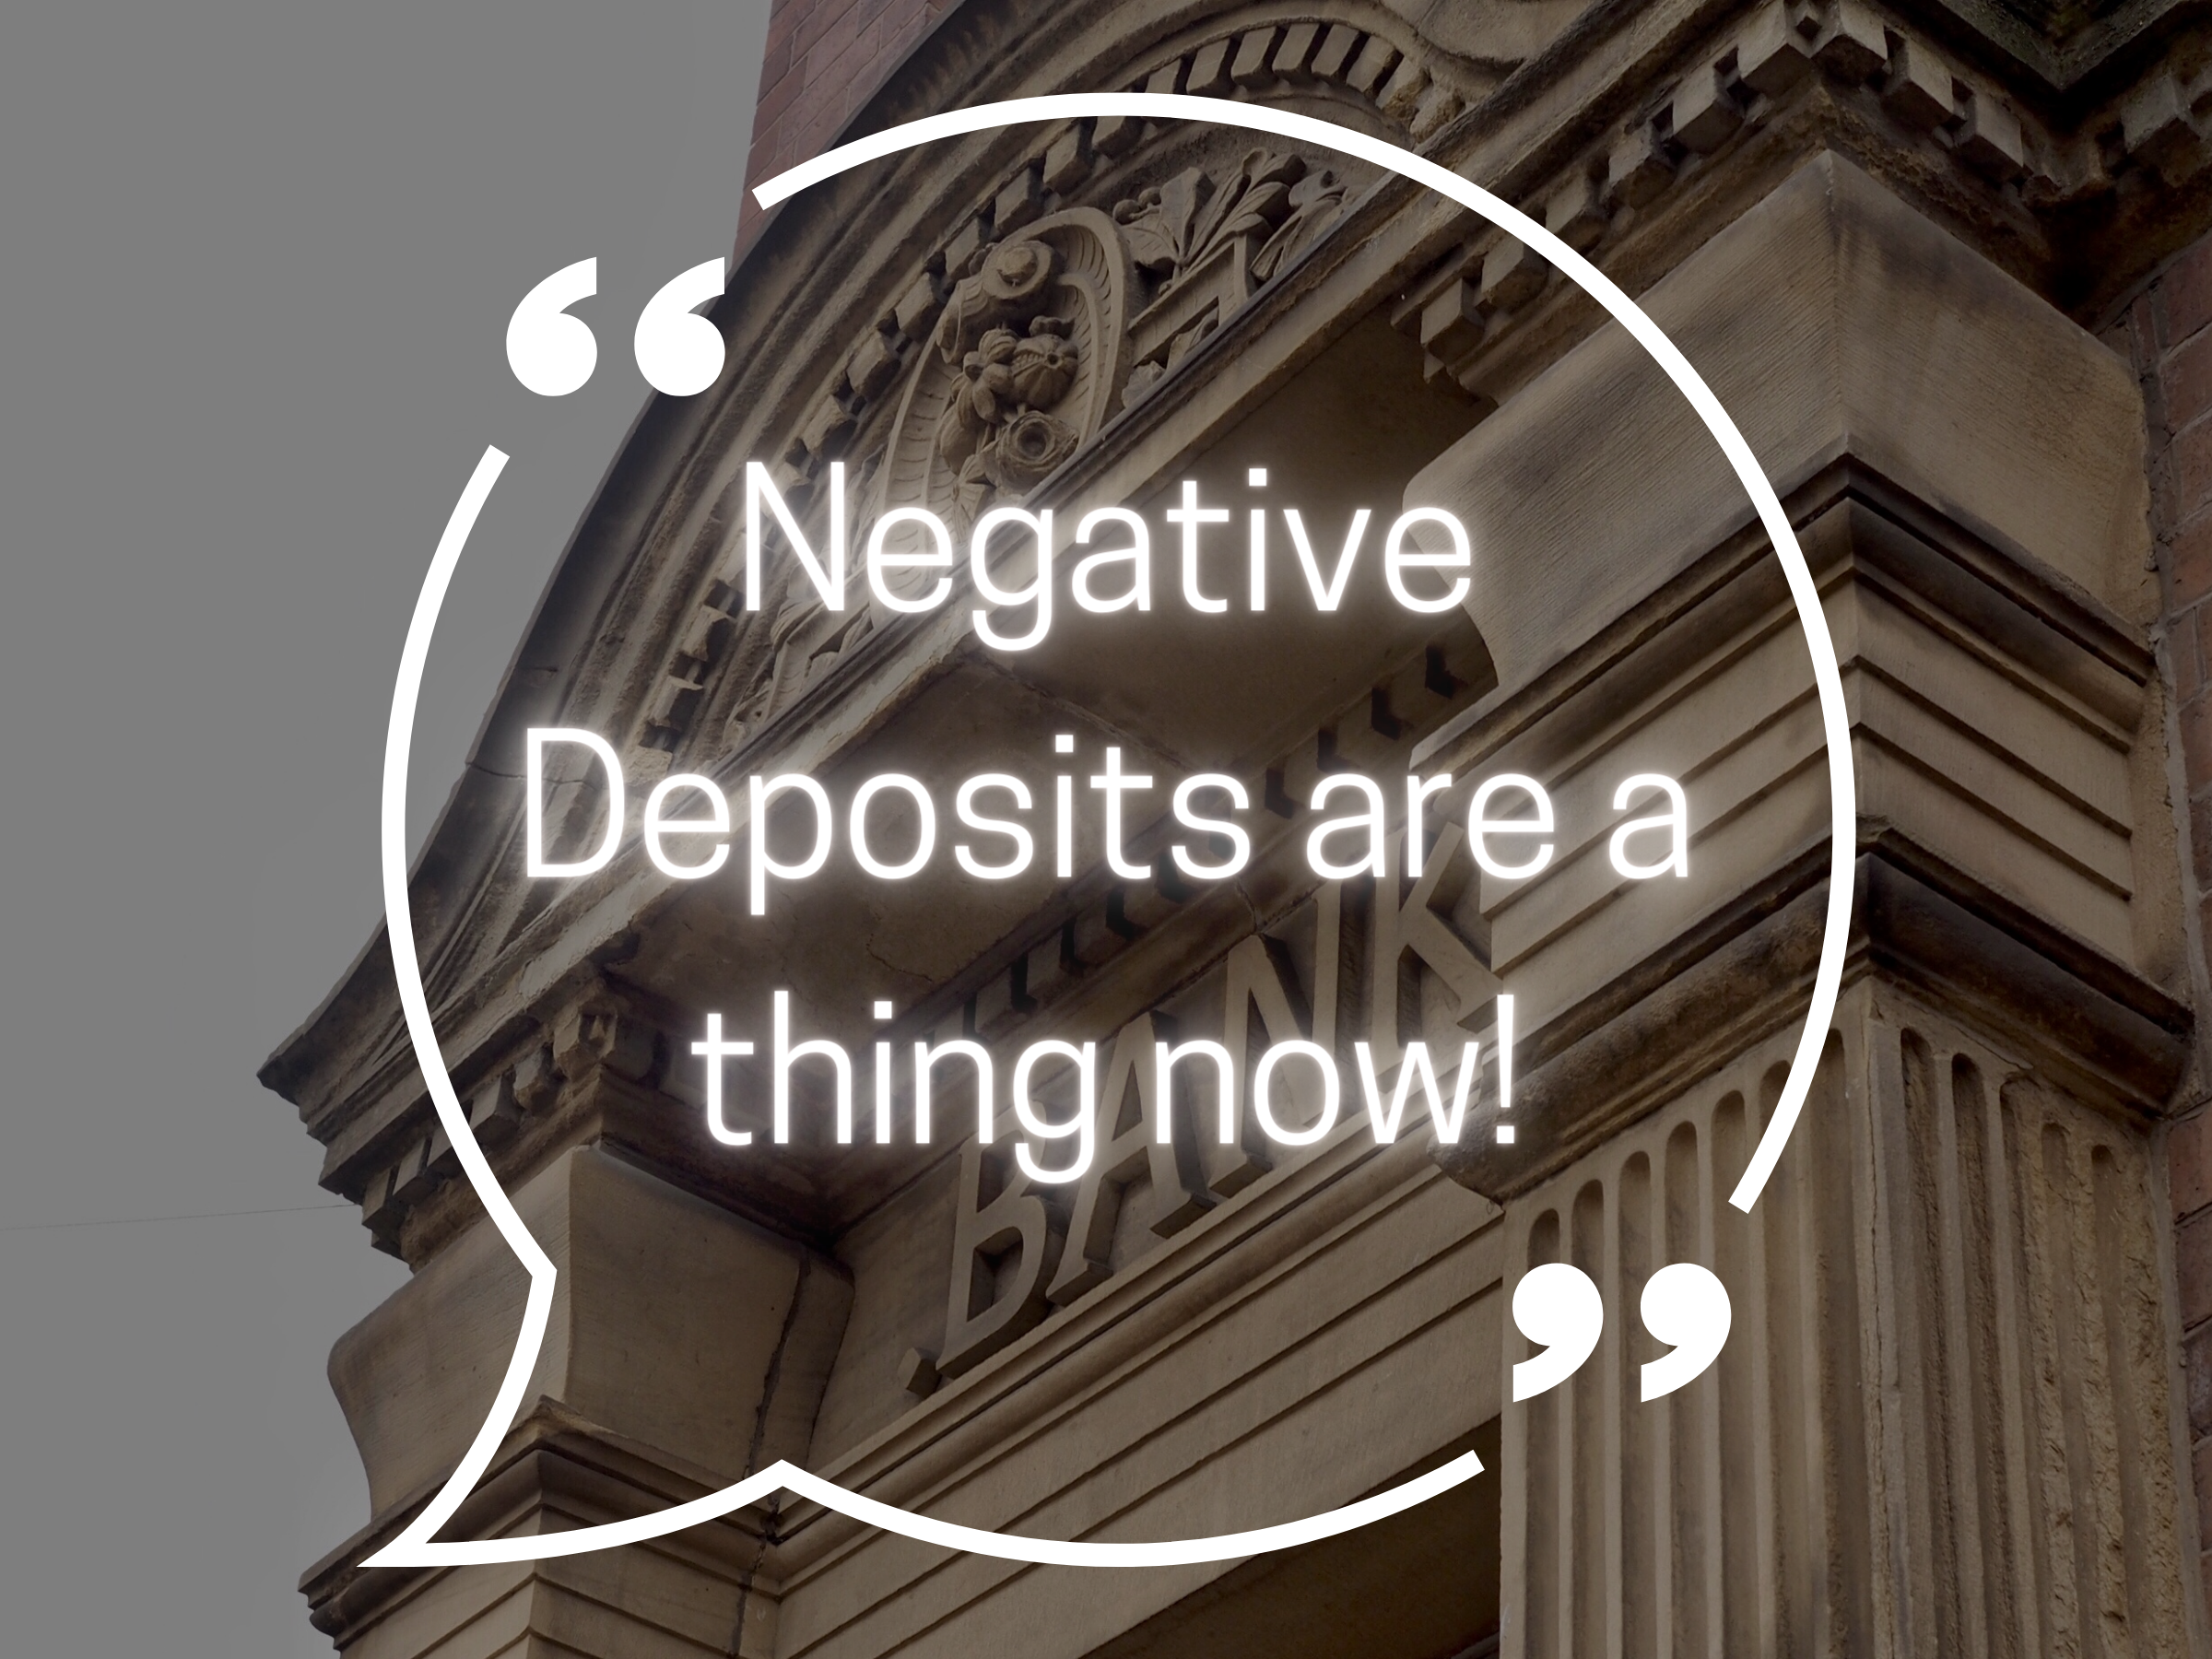 Negative deposits are a thing now